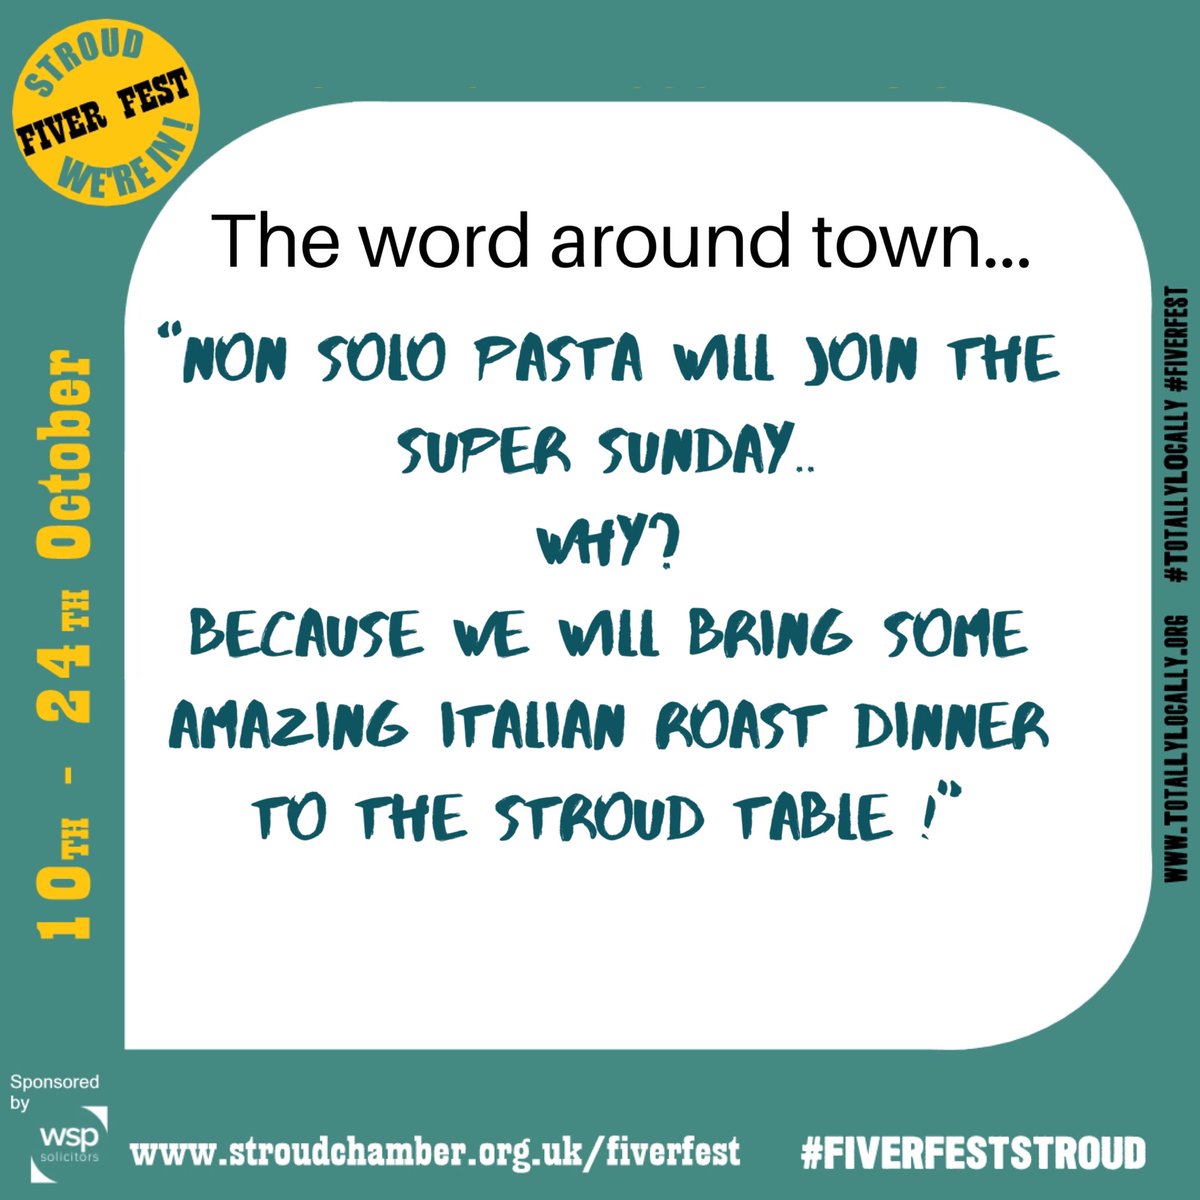 Non Solo Pasta shares their Fiver Fest story with us. Along with many other businesses in town, they are open tomorrow for #Stroud Super Sunday 🎉

Please add coming into town on your To Do list for tomorrow ❤️

#StroudSuperSunday #VisitStroud #StroudFiverFest